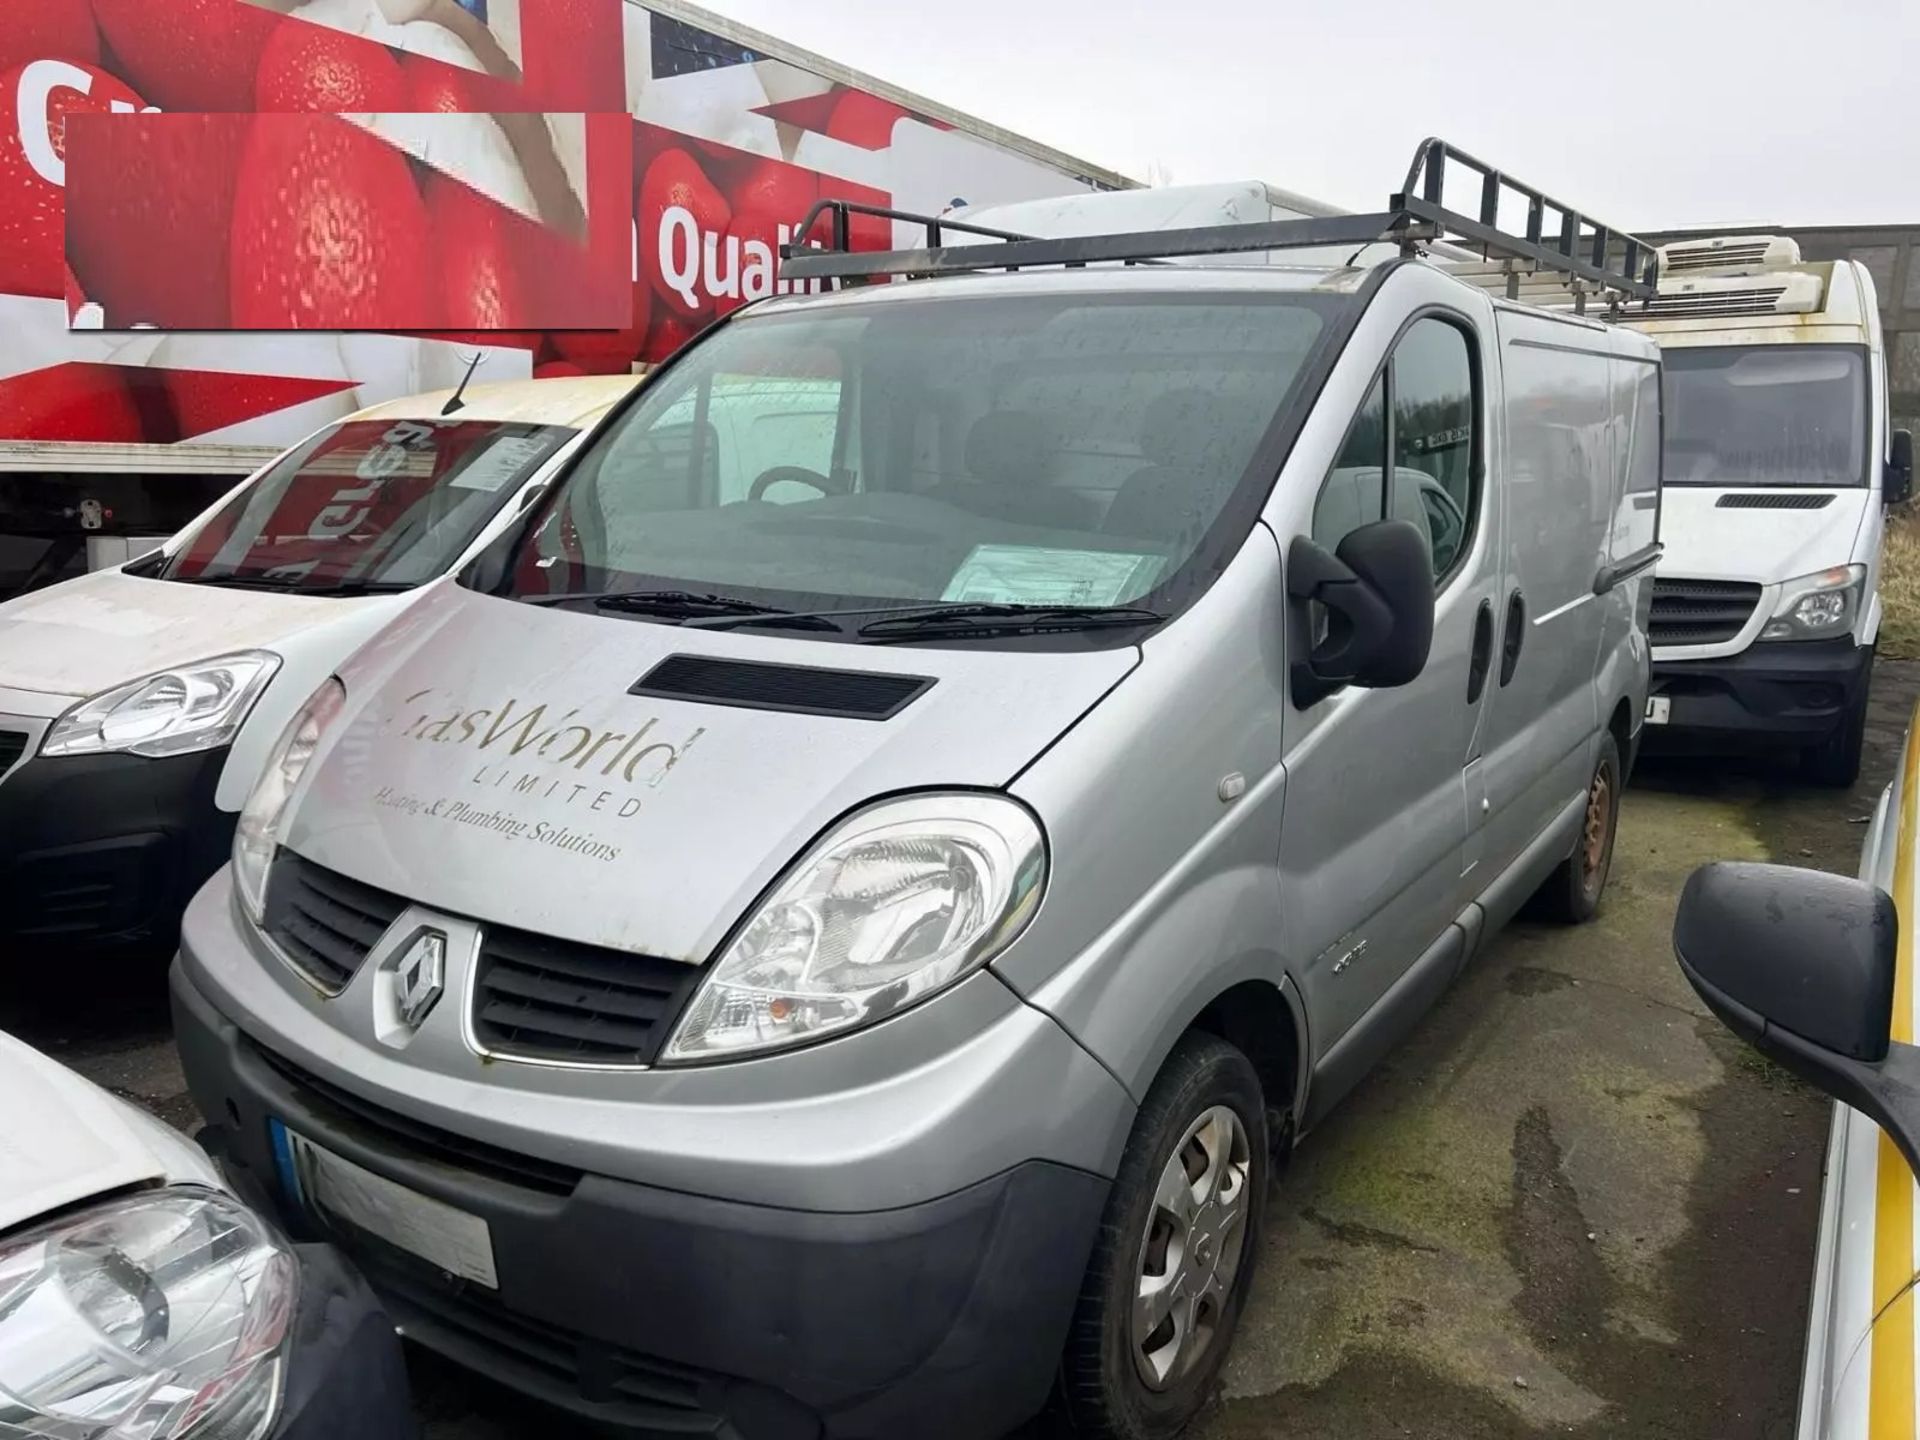 RENAULT TRAFIC SL27 DCI SWB PANEL VAN 2013 - IDEAL FOR REPAIRS, GREAT VALUE - Image 4 of 5